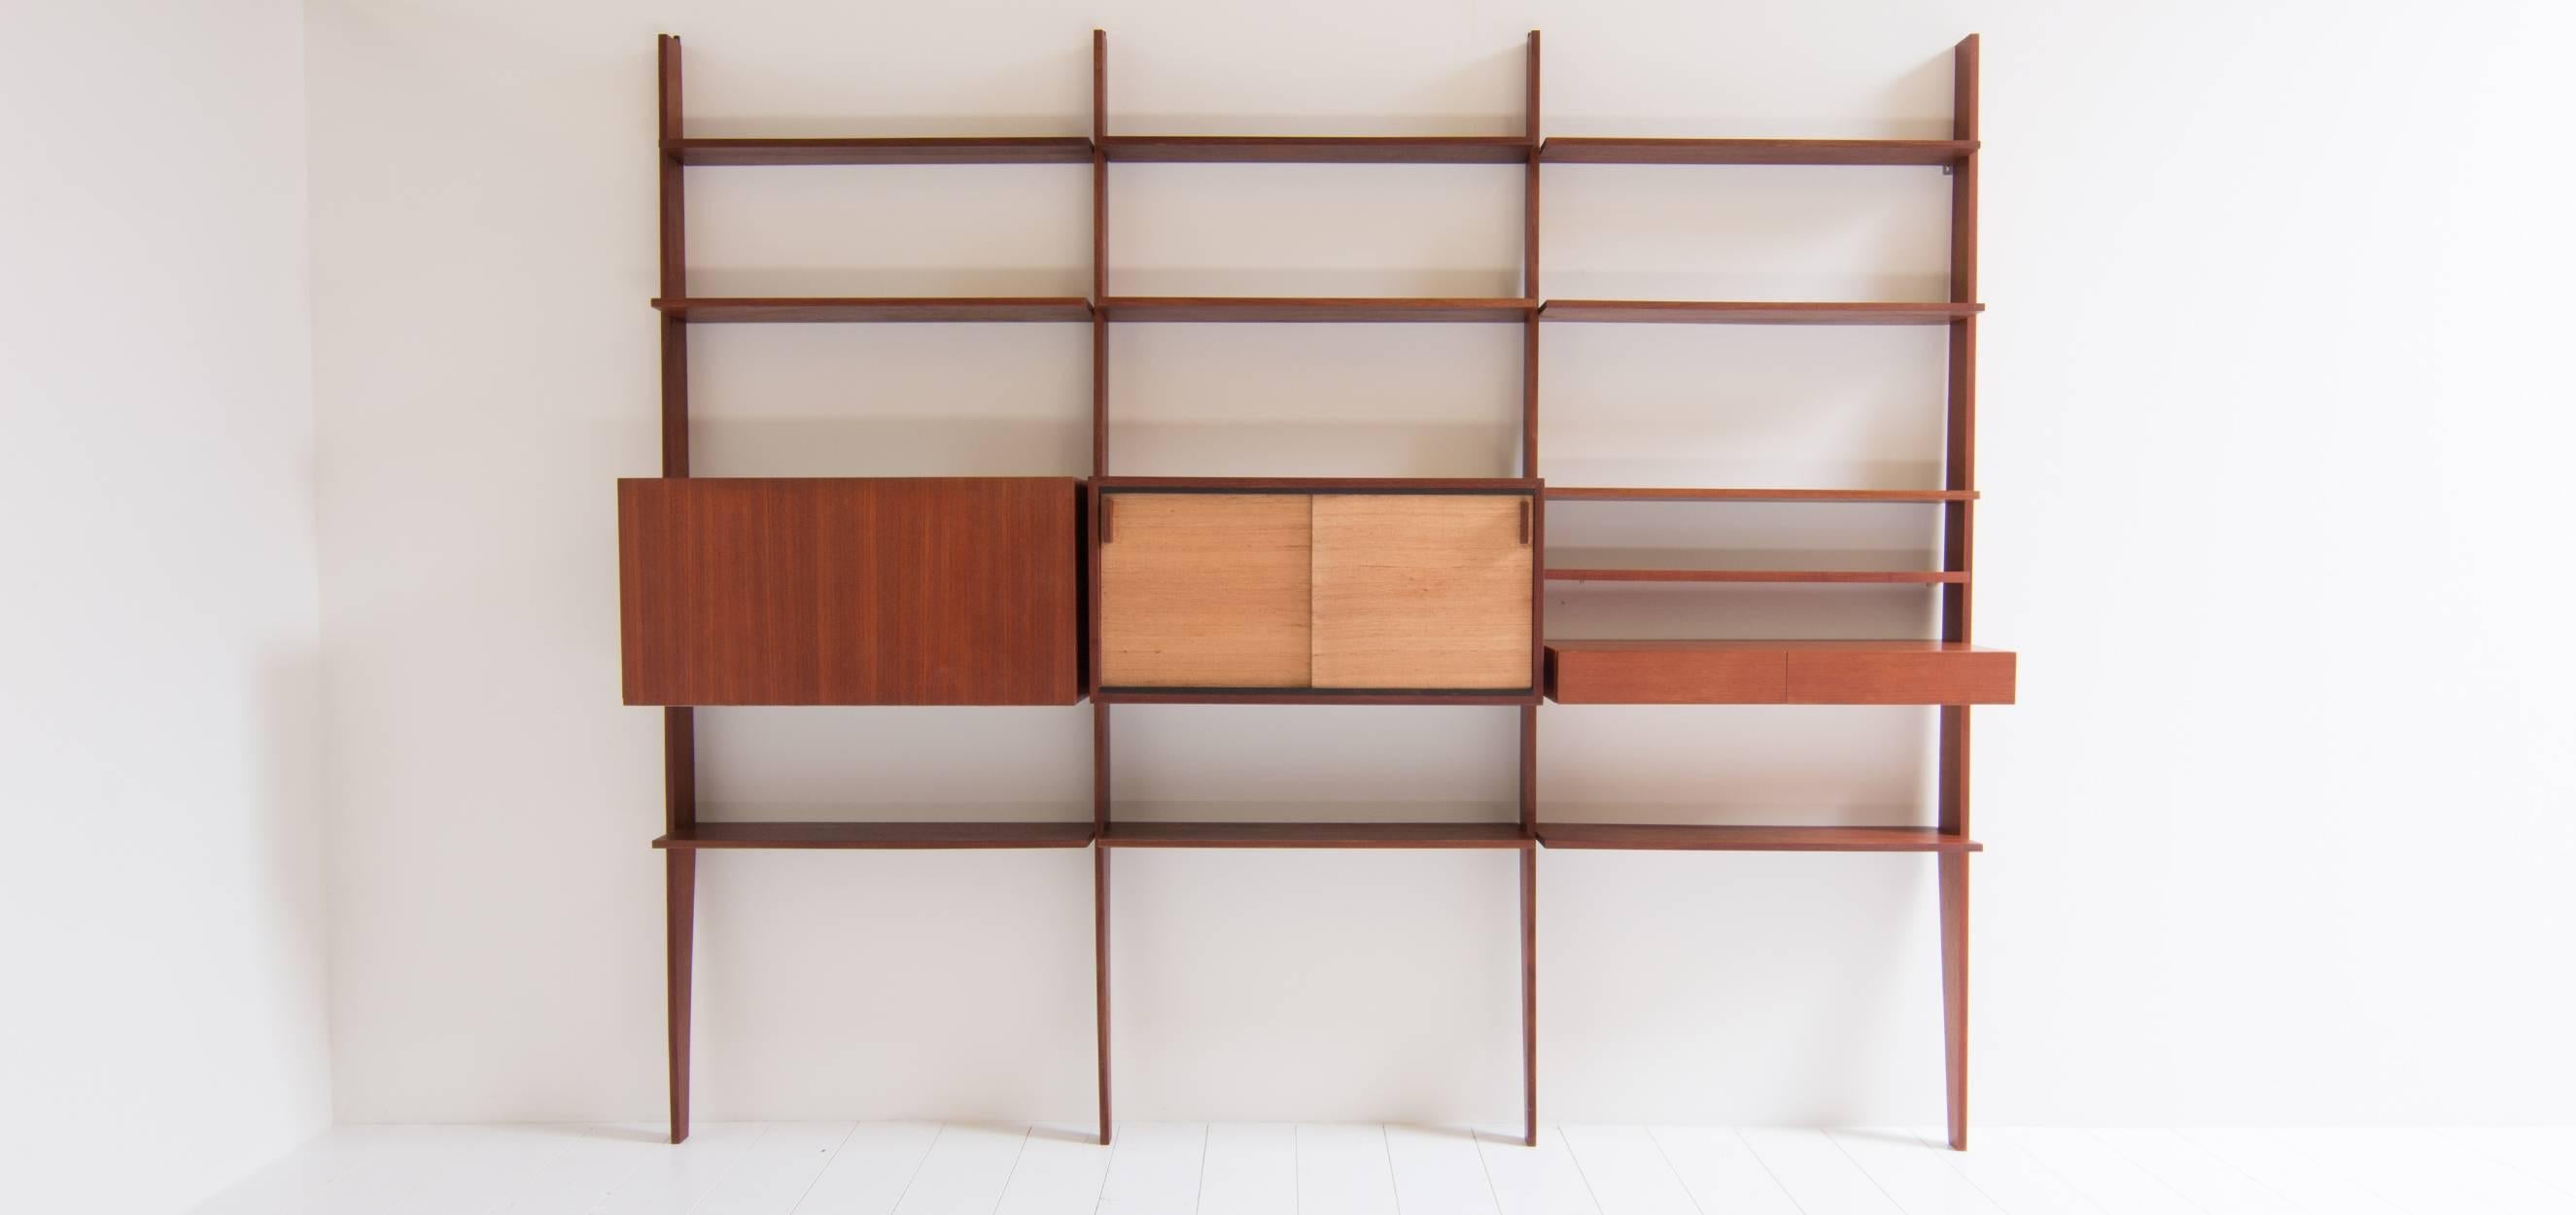 This Dieter Waeckerlin wall system was designed in the 1960s. The wall system was designed by Dieter Waeckerlin for the German manufacturer Behr Møbel. The complete system is made of teak wood. The shelves are all made of massive teak except for